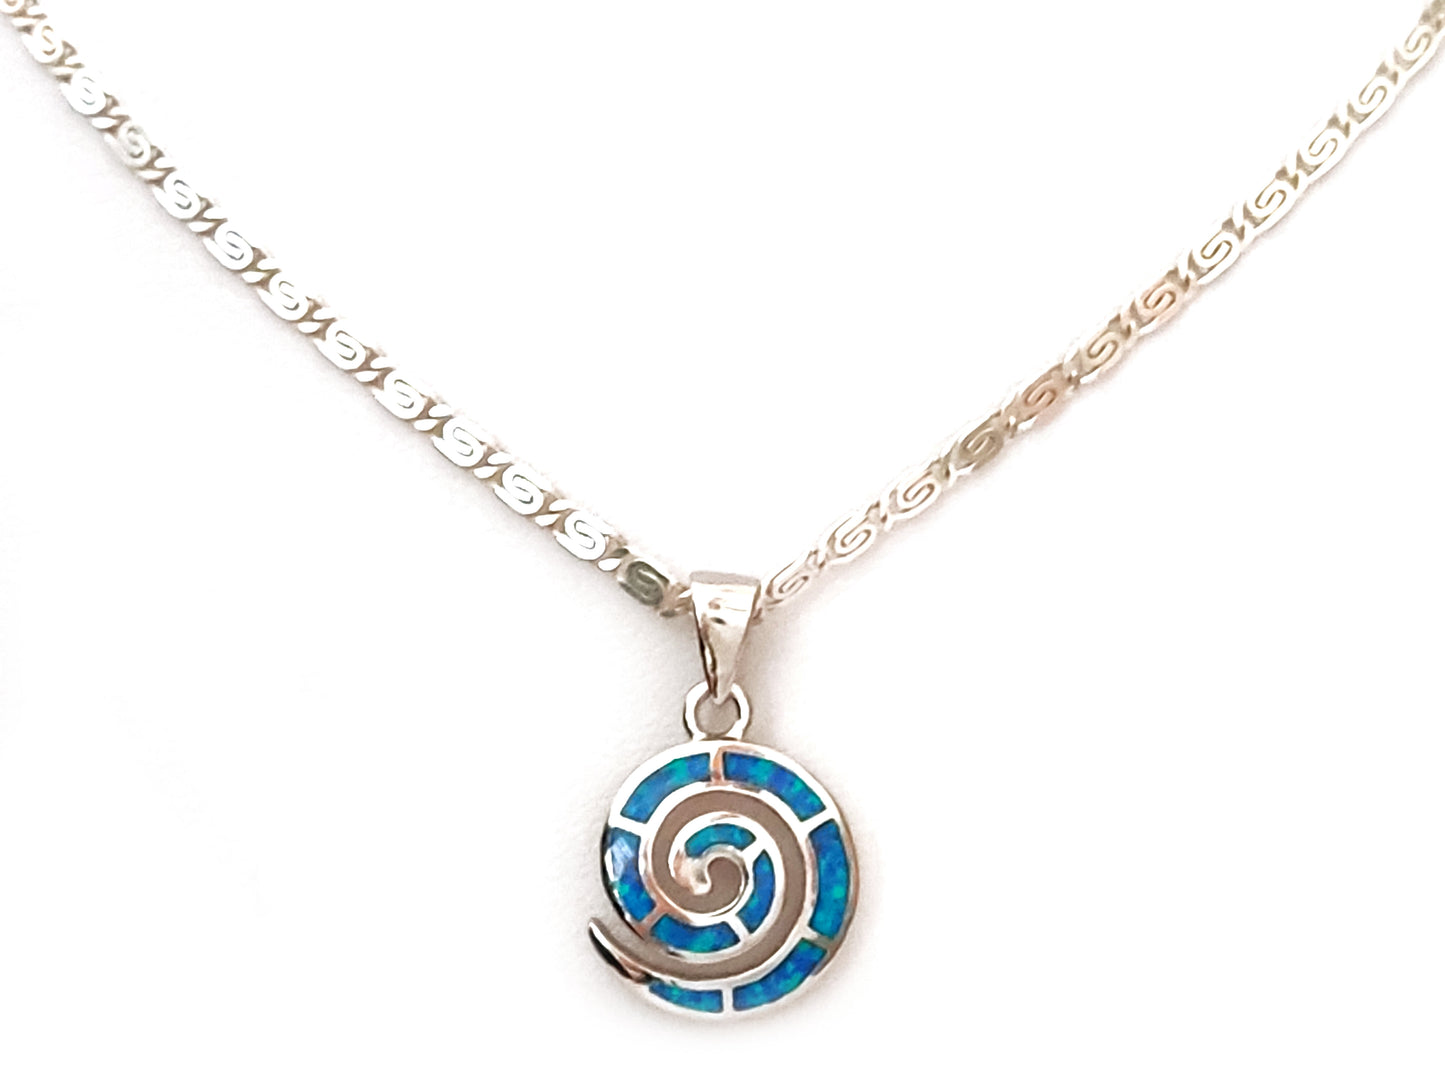 Greek silver chain necklace with a Greek spiral silver pendant and blue opal stones. The chain has the ancient Greek infinity design and measures 2mm, part of our Greek silver jewelry collection.